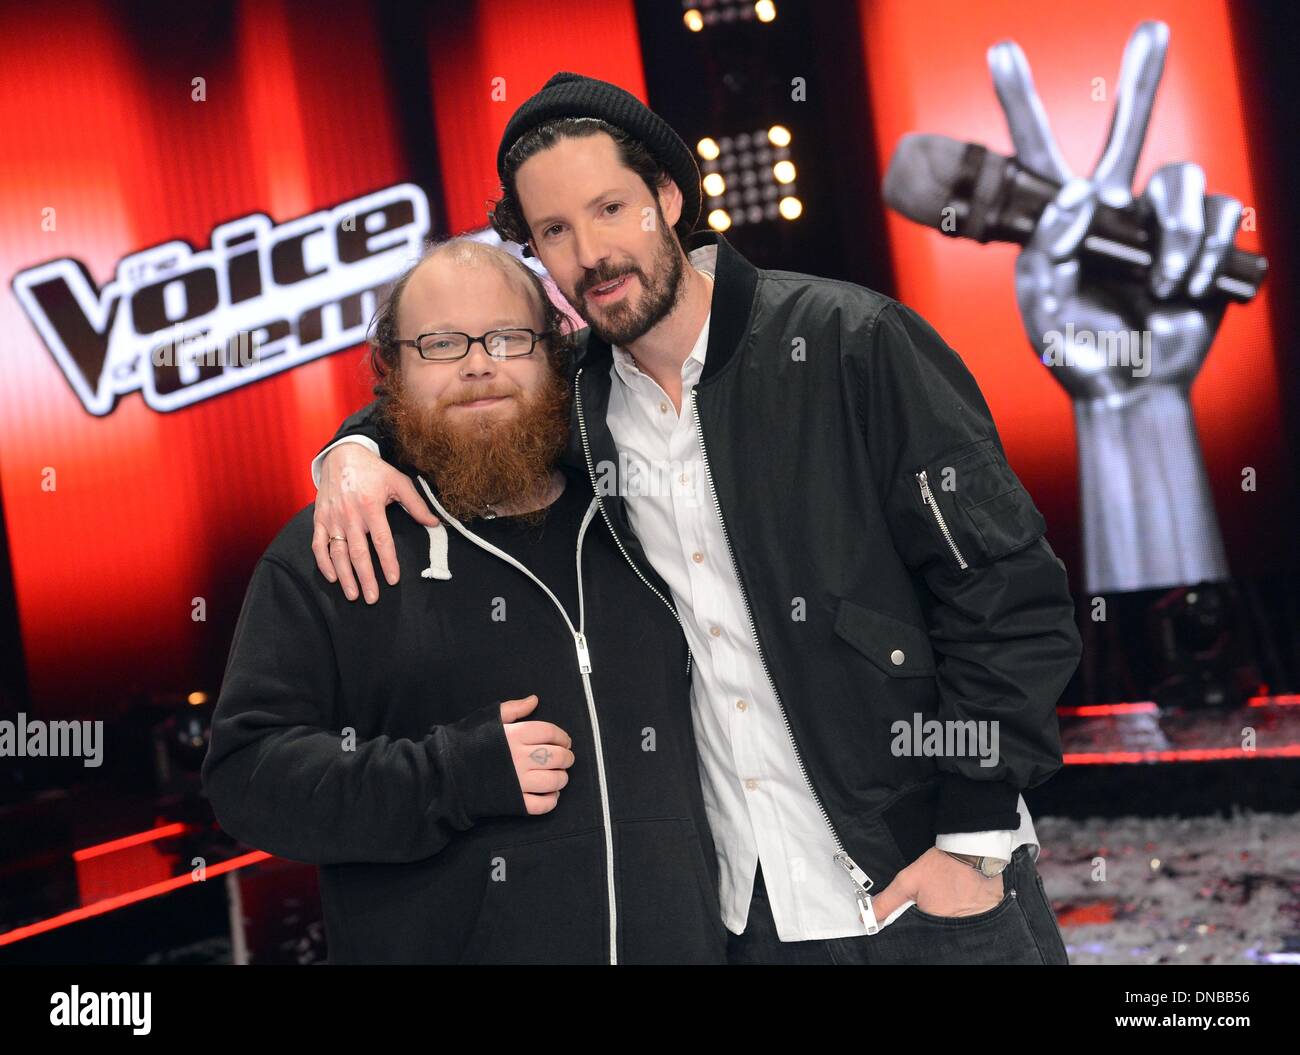 Musician Andreas Kuemmert (L) and Max Herre perform during the final of the  talent show "The Voice of Germany" in Berlin, Germany, 20 Decemebr 2013.  Photo: BRITTA PEDERSEN Stock Photo - Alamy